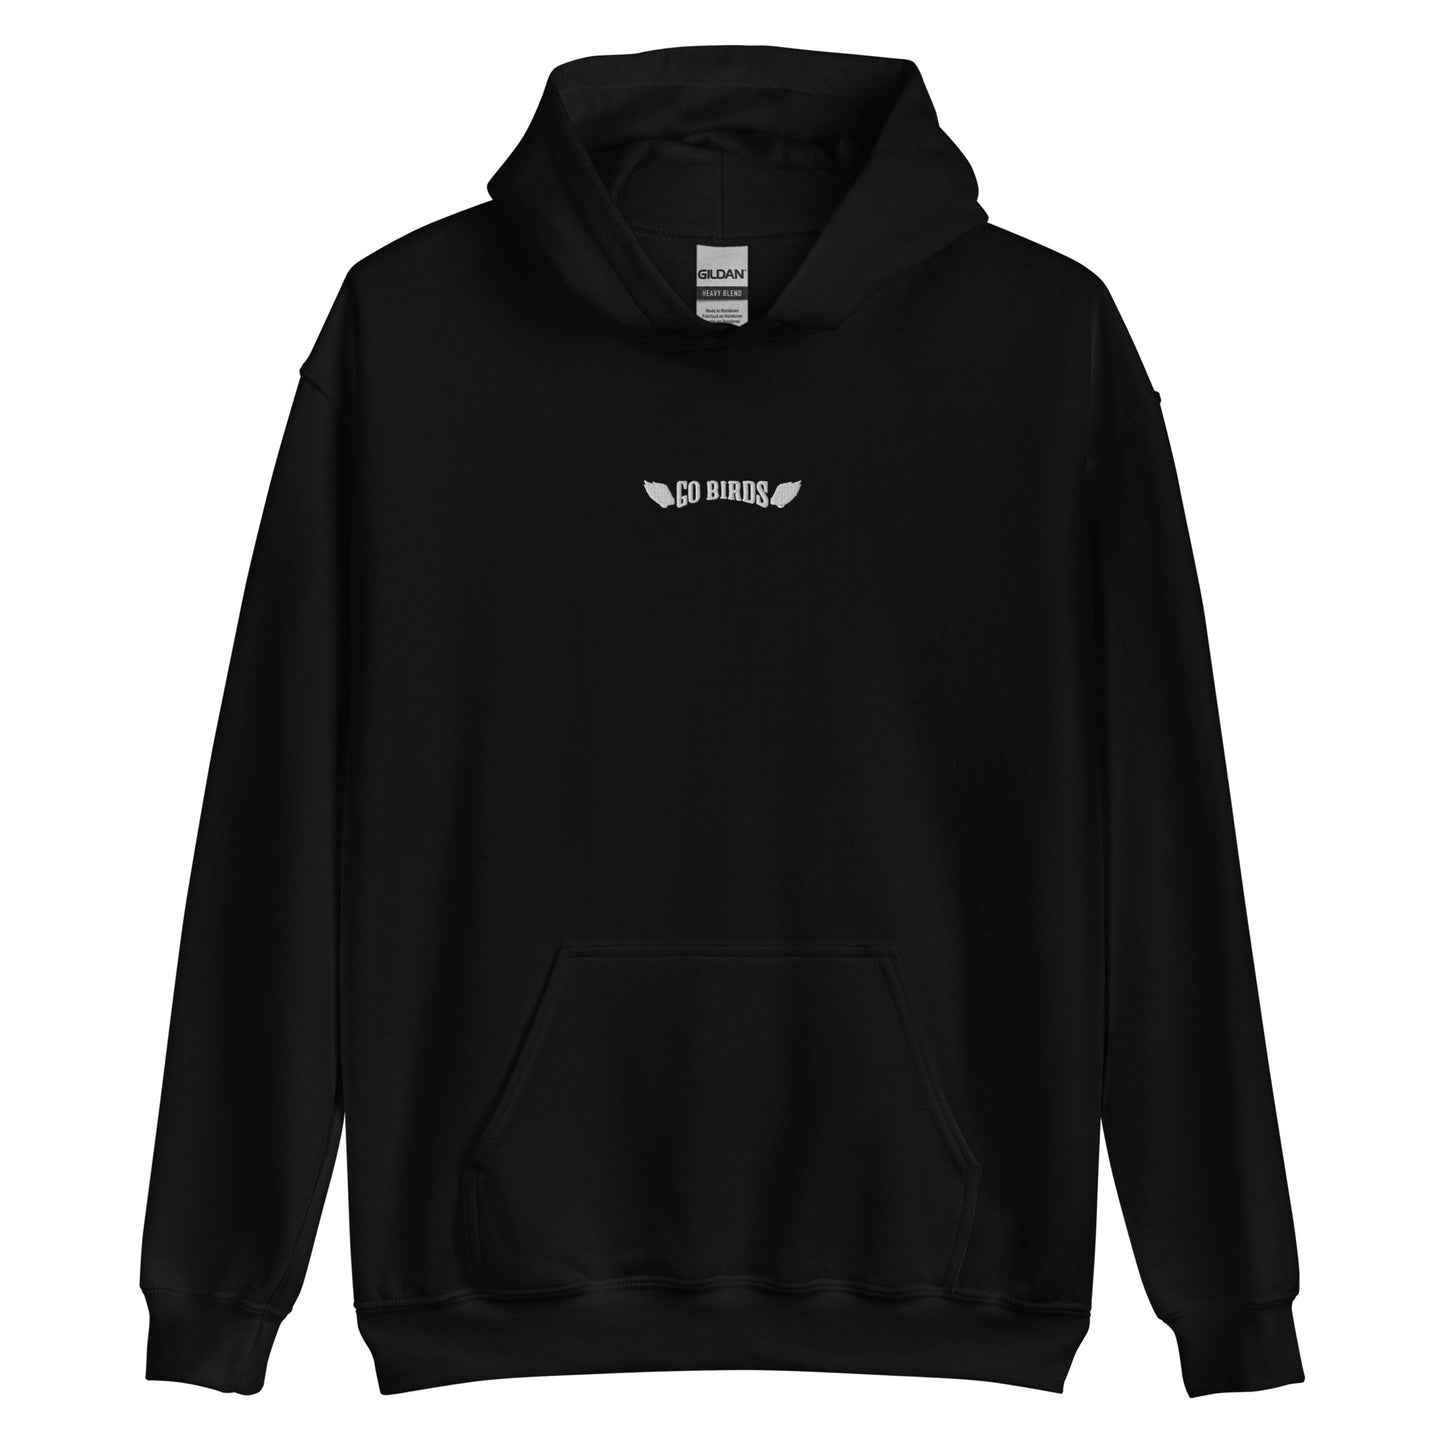 Go Birds Embroidered Hoodie